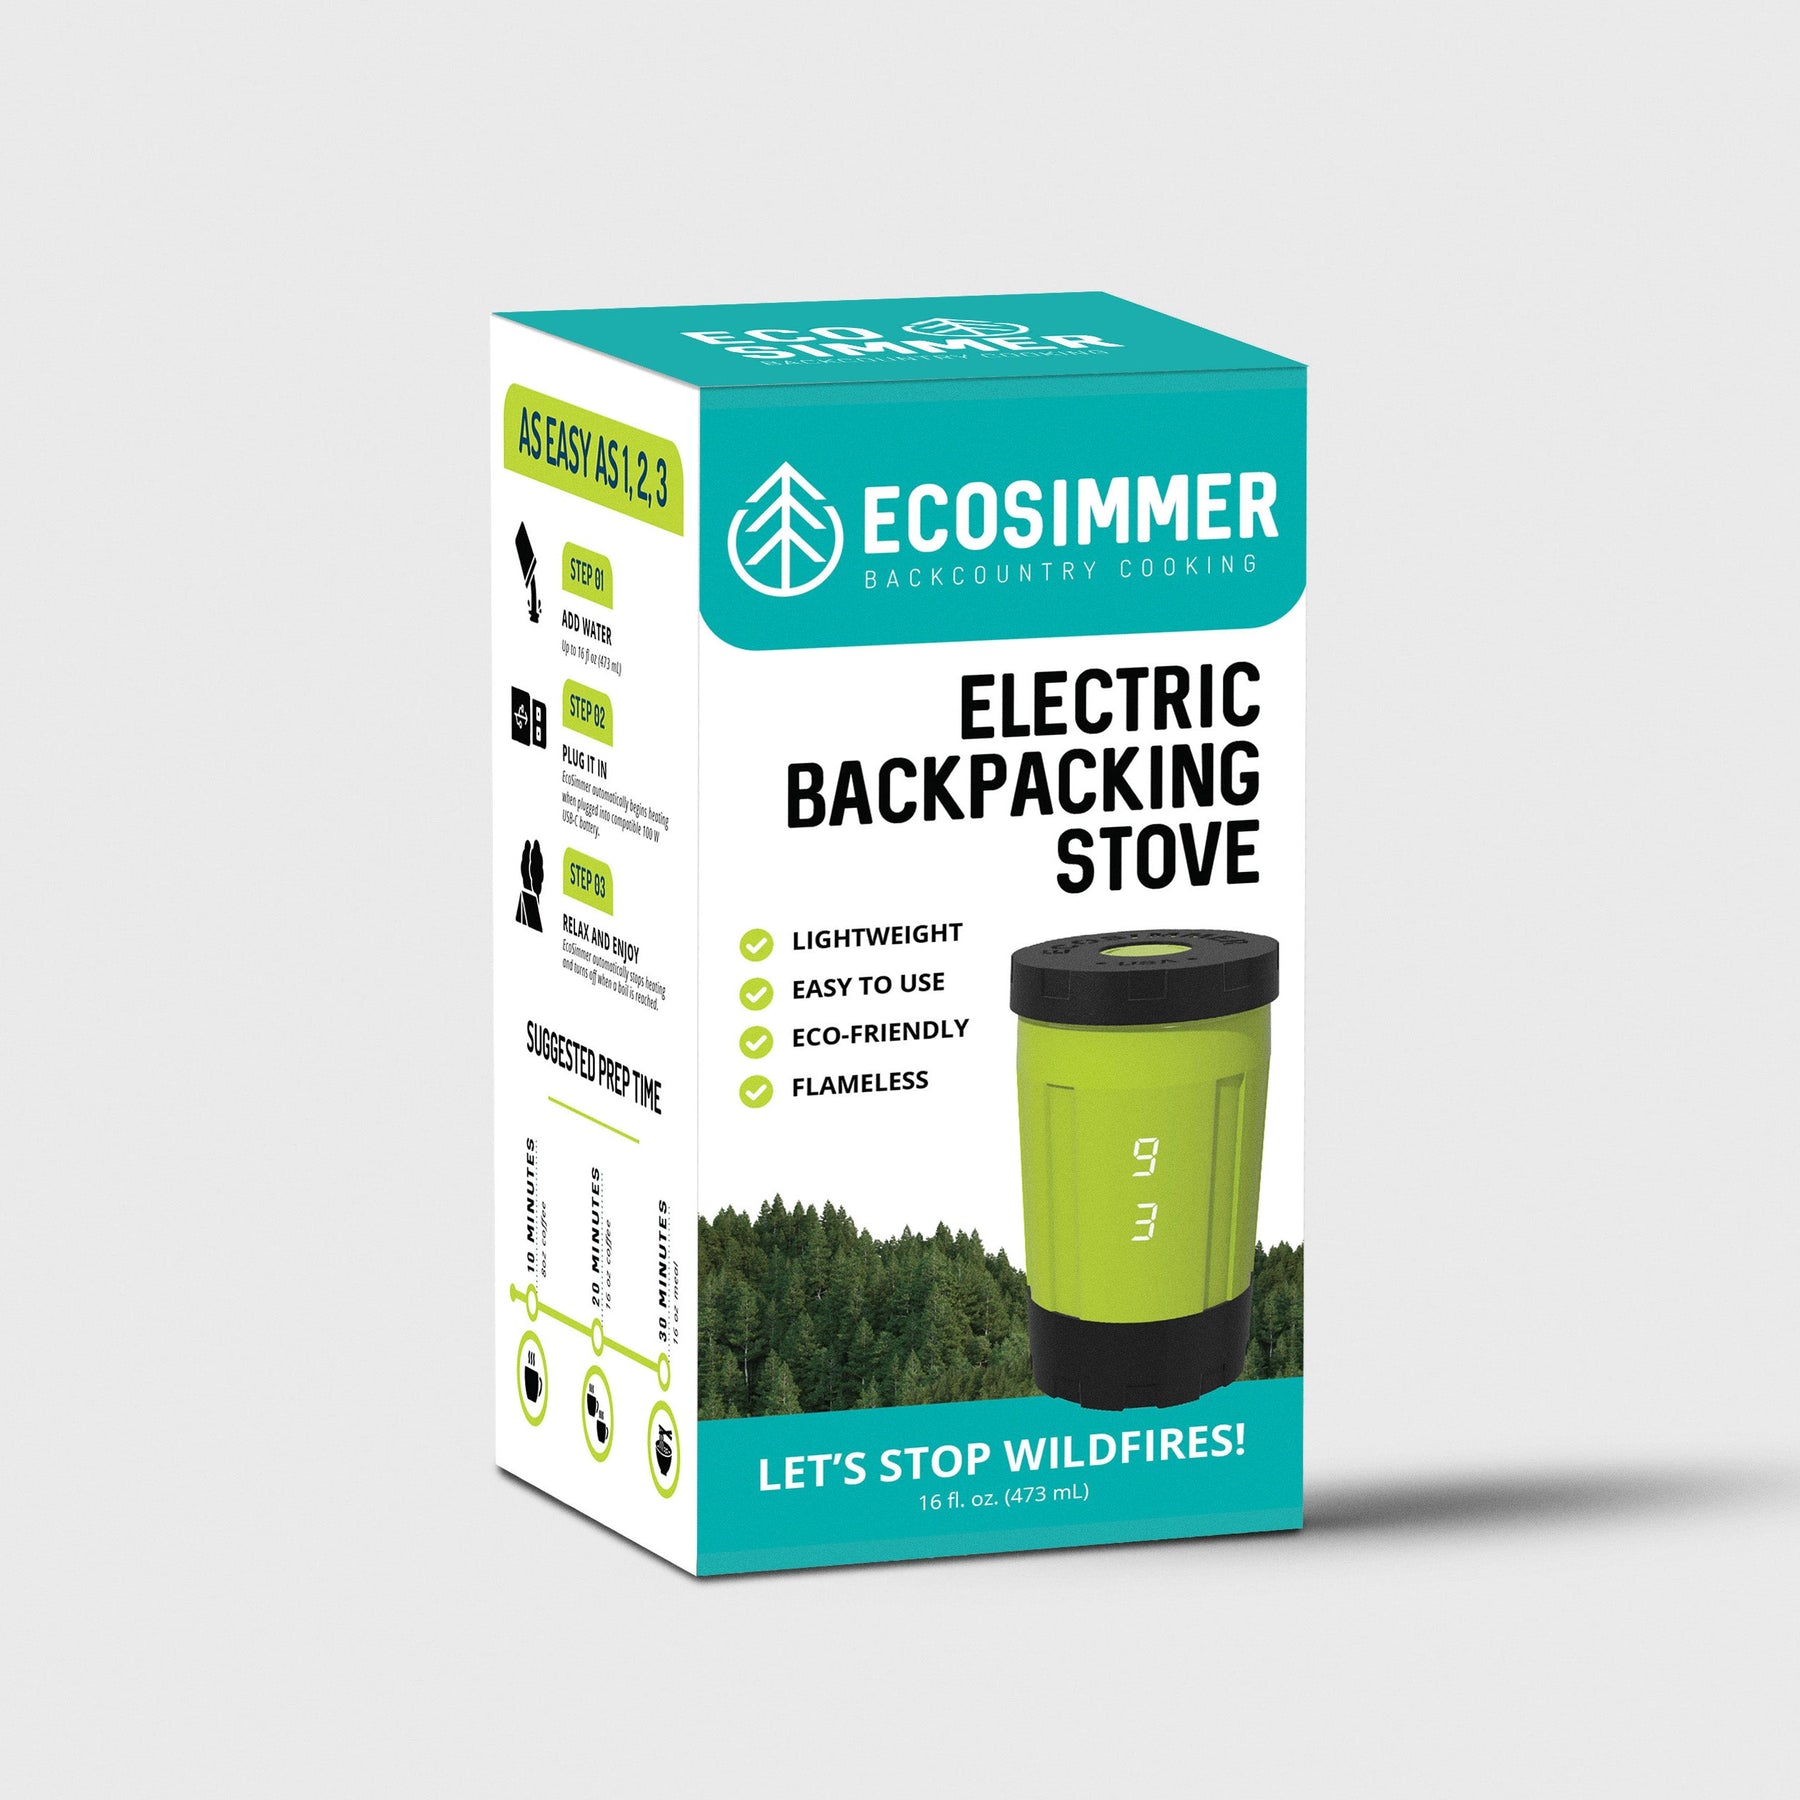 Electric camping stoves – hobs, microwaves and more